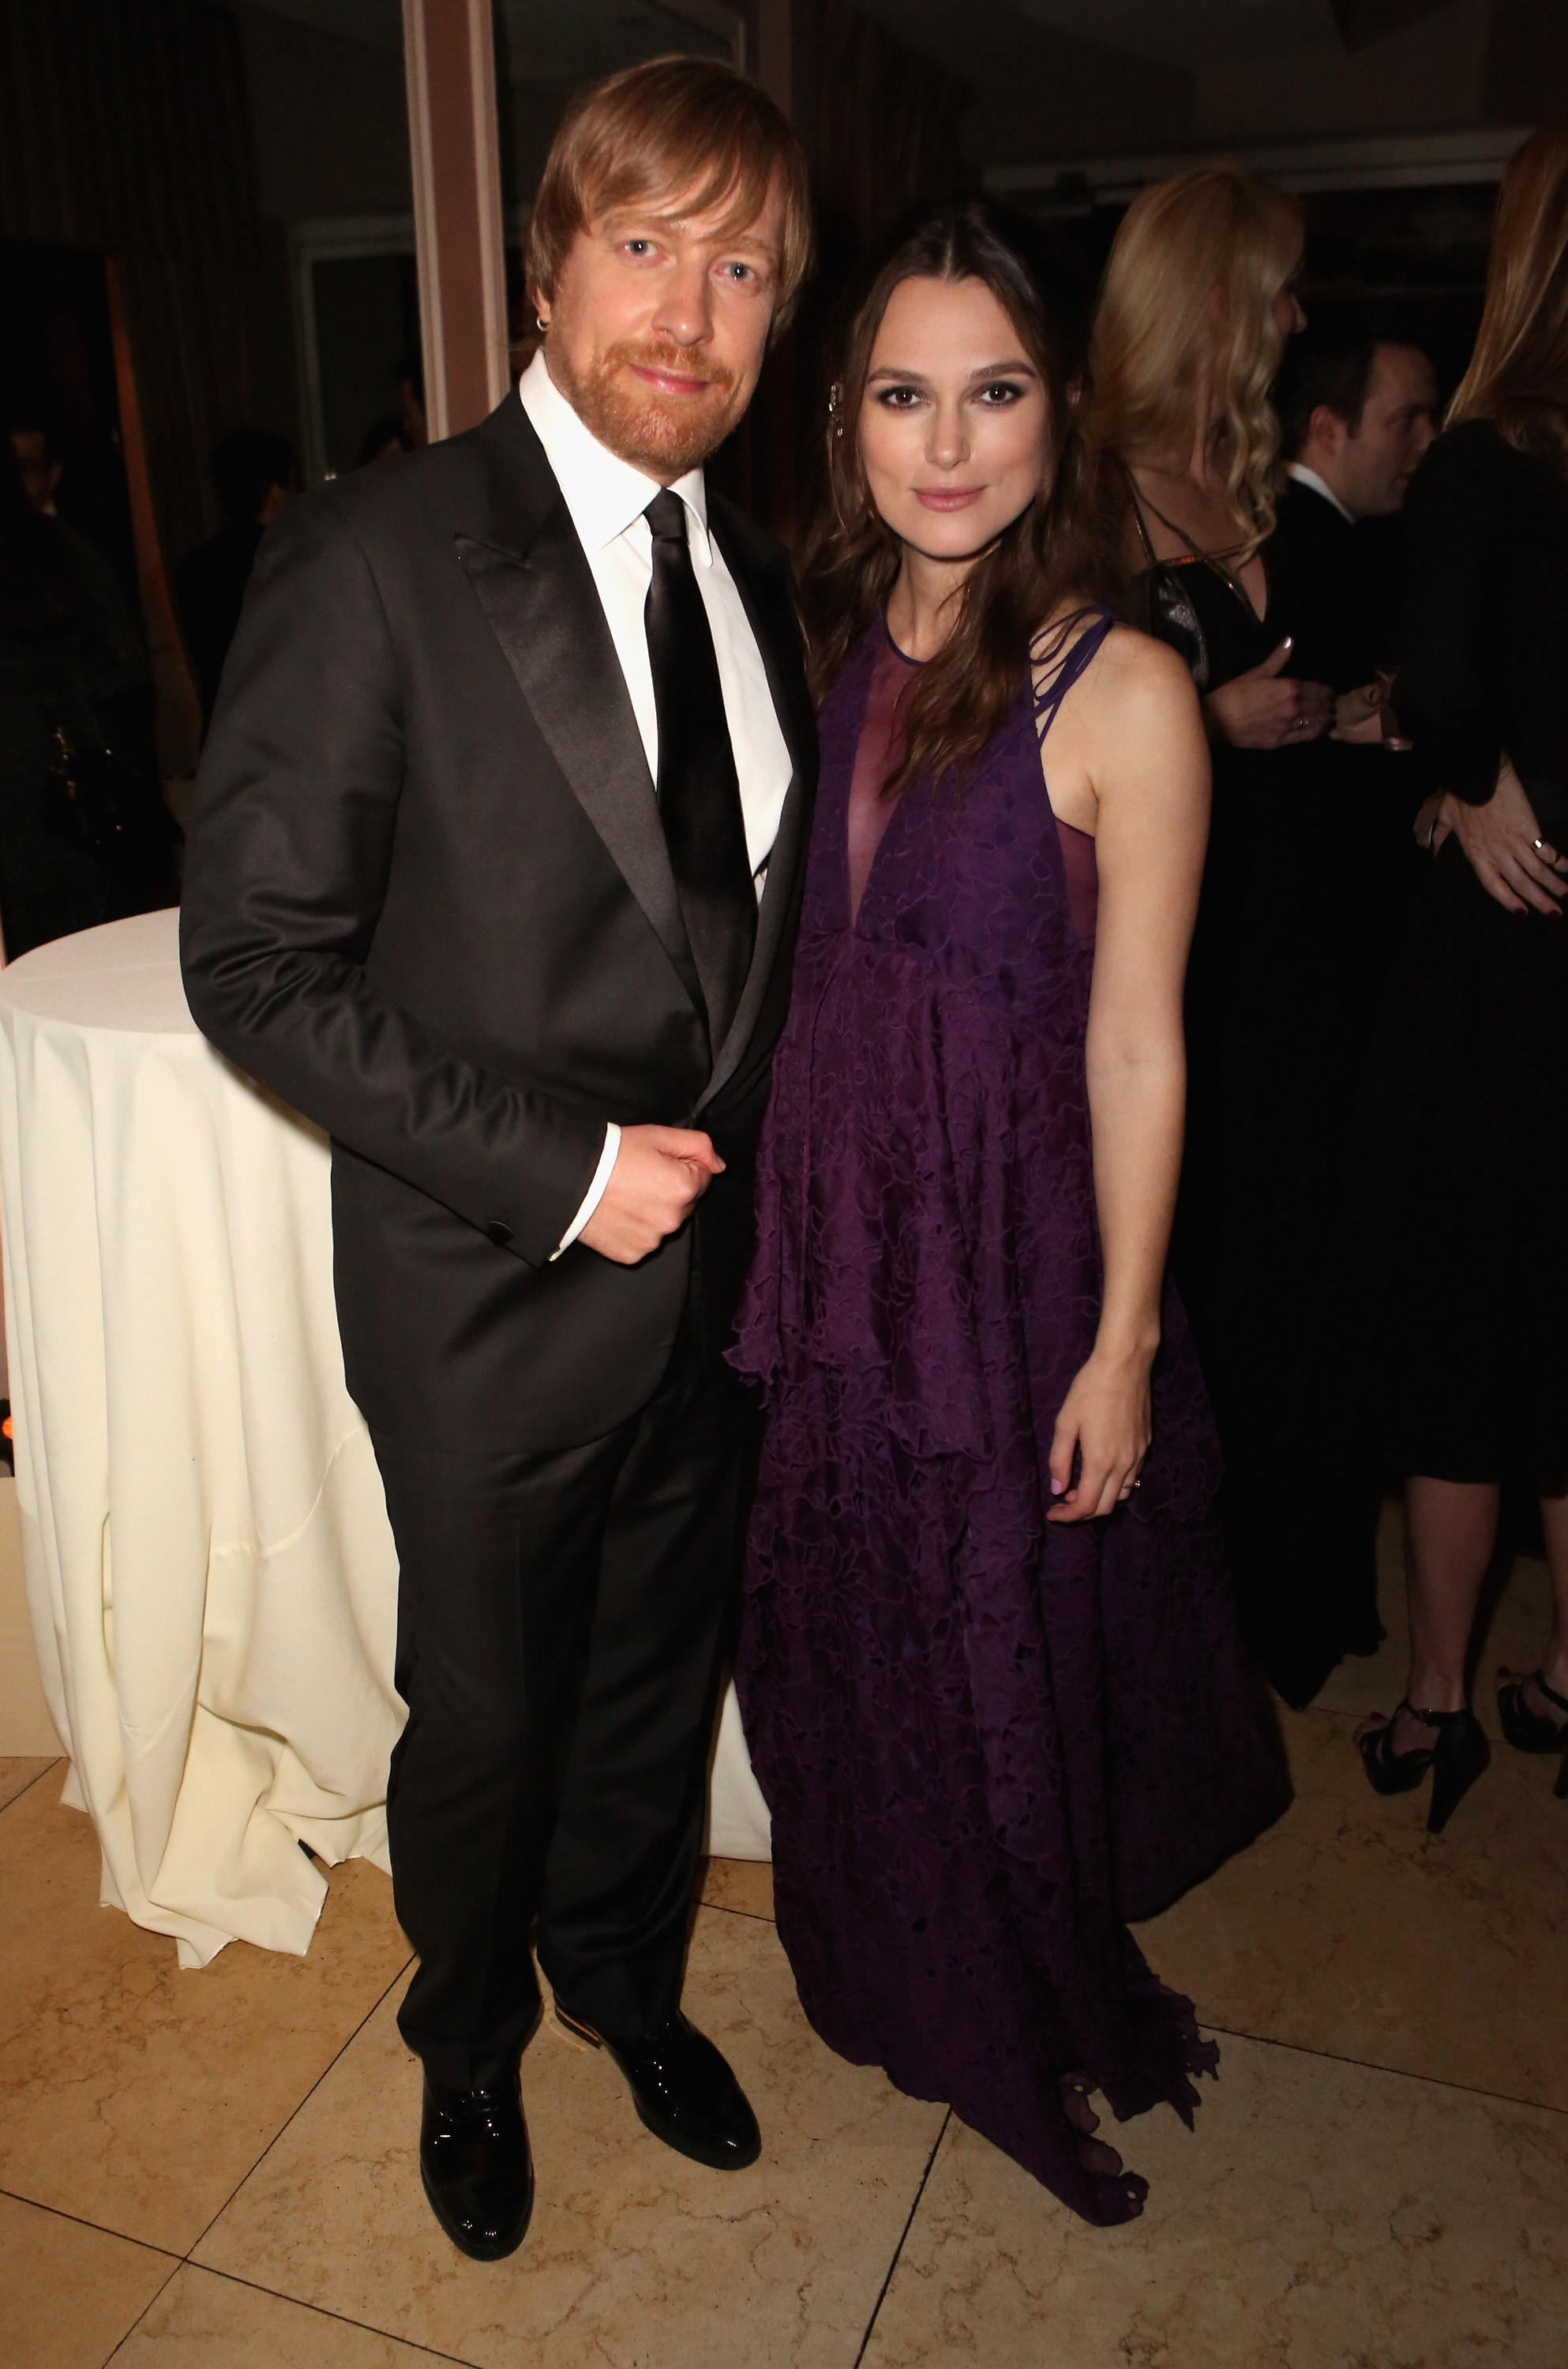 Director Morten Tyldum and actress Keira Knightley attends The Weinstein Company & Netflix's 2015 SAG After Party